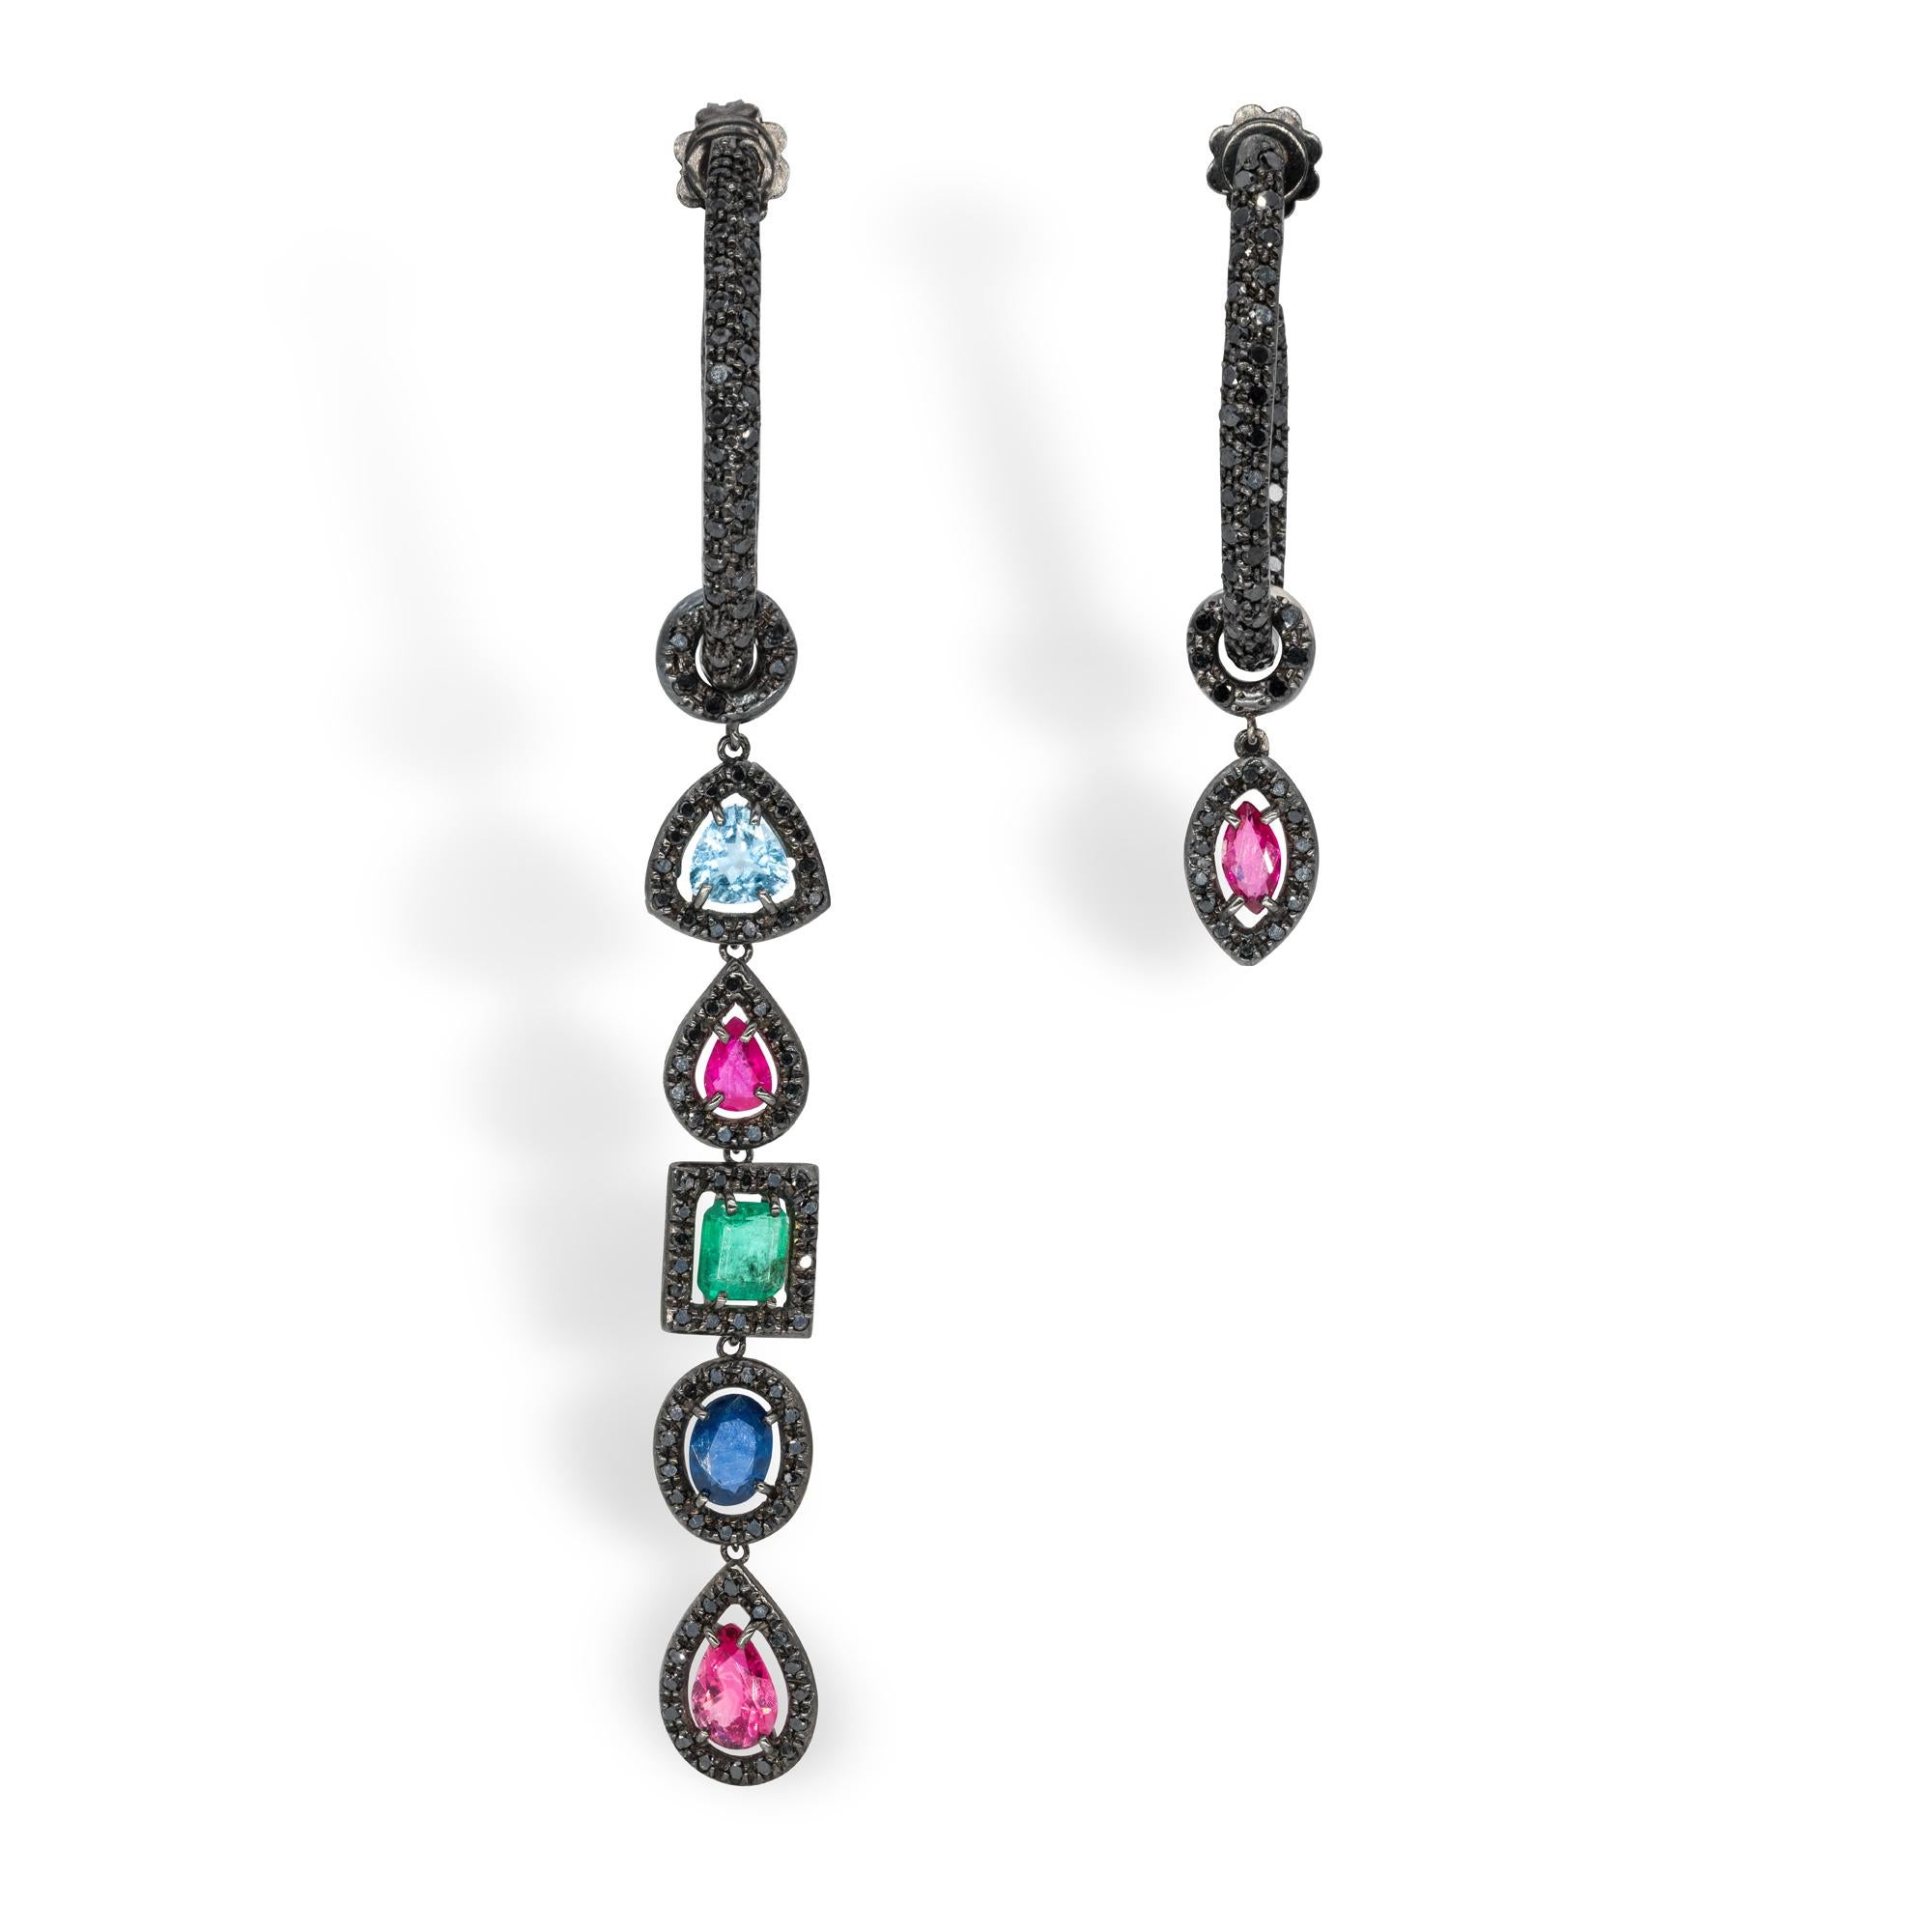 d'Avossa  Hoop Earrings in 18 kt gold with a pavé of black diamonds, and Asimmetric Pendants made with Precious Stones in different cuts, framed with little Black Diamonds
The Pendants have been designed to be worn also as a Pair of